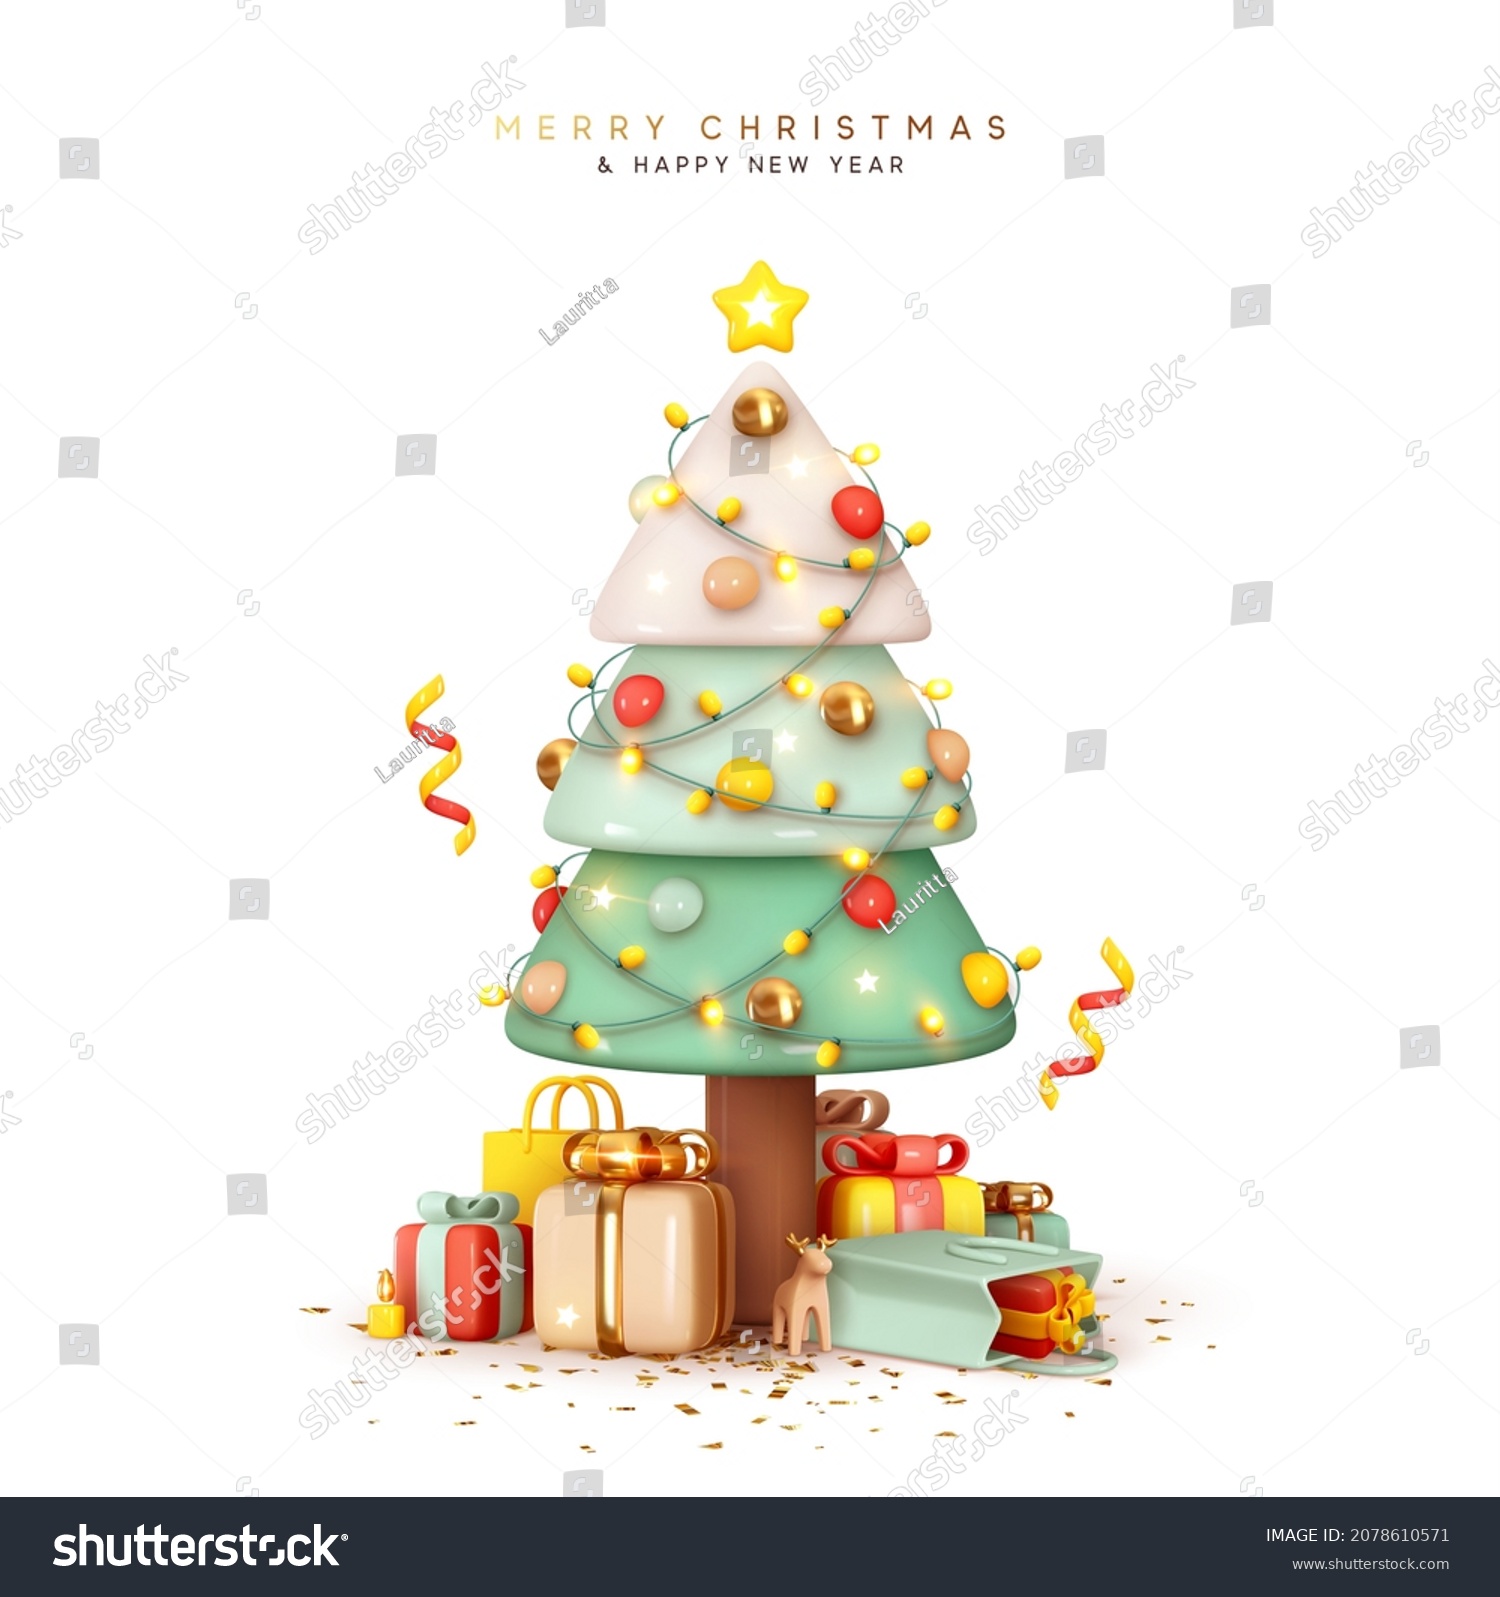 Christmas sparkling bright tree with star. Merry Christmas and Happy New Year. Realistic 3d design of objects, light garlands, bauble ball, Gift box, surprise gifts, gold confetti. Vector illustration #2078610571